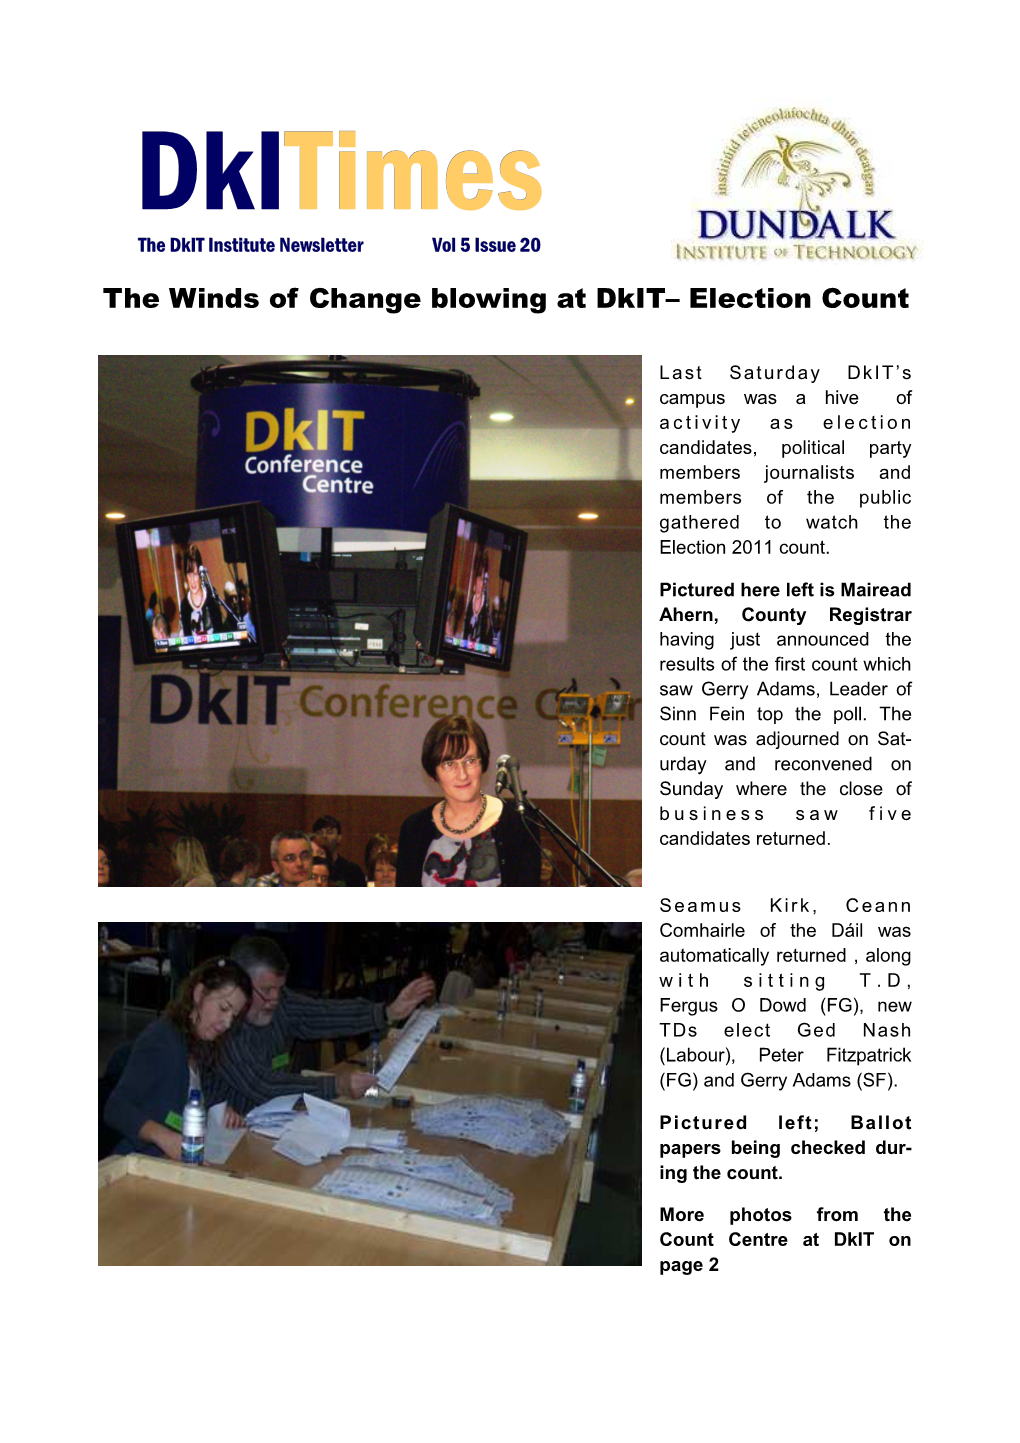 The Winds of Change Blowing at Dkit– Election Count